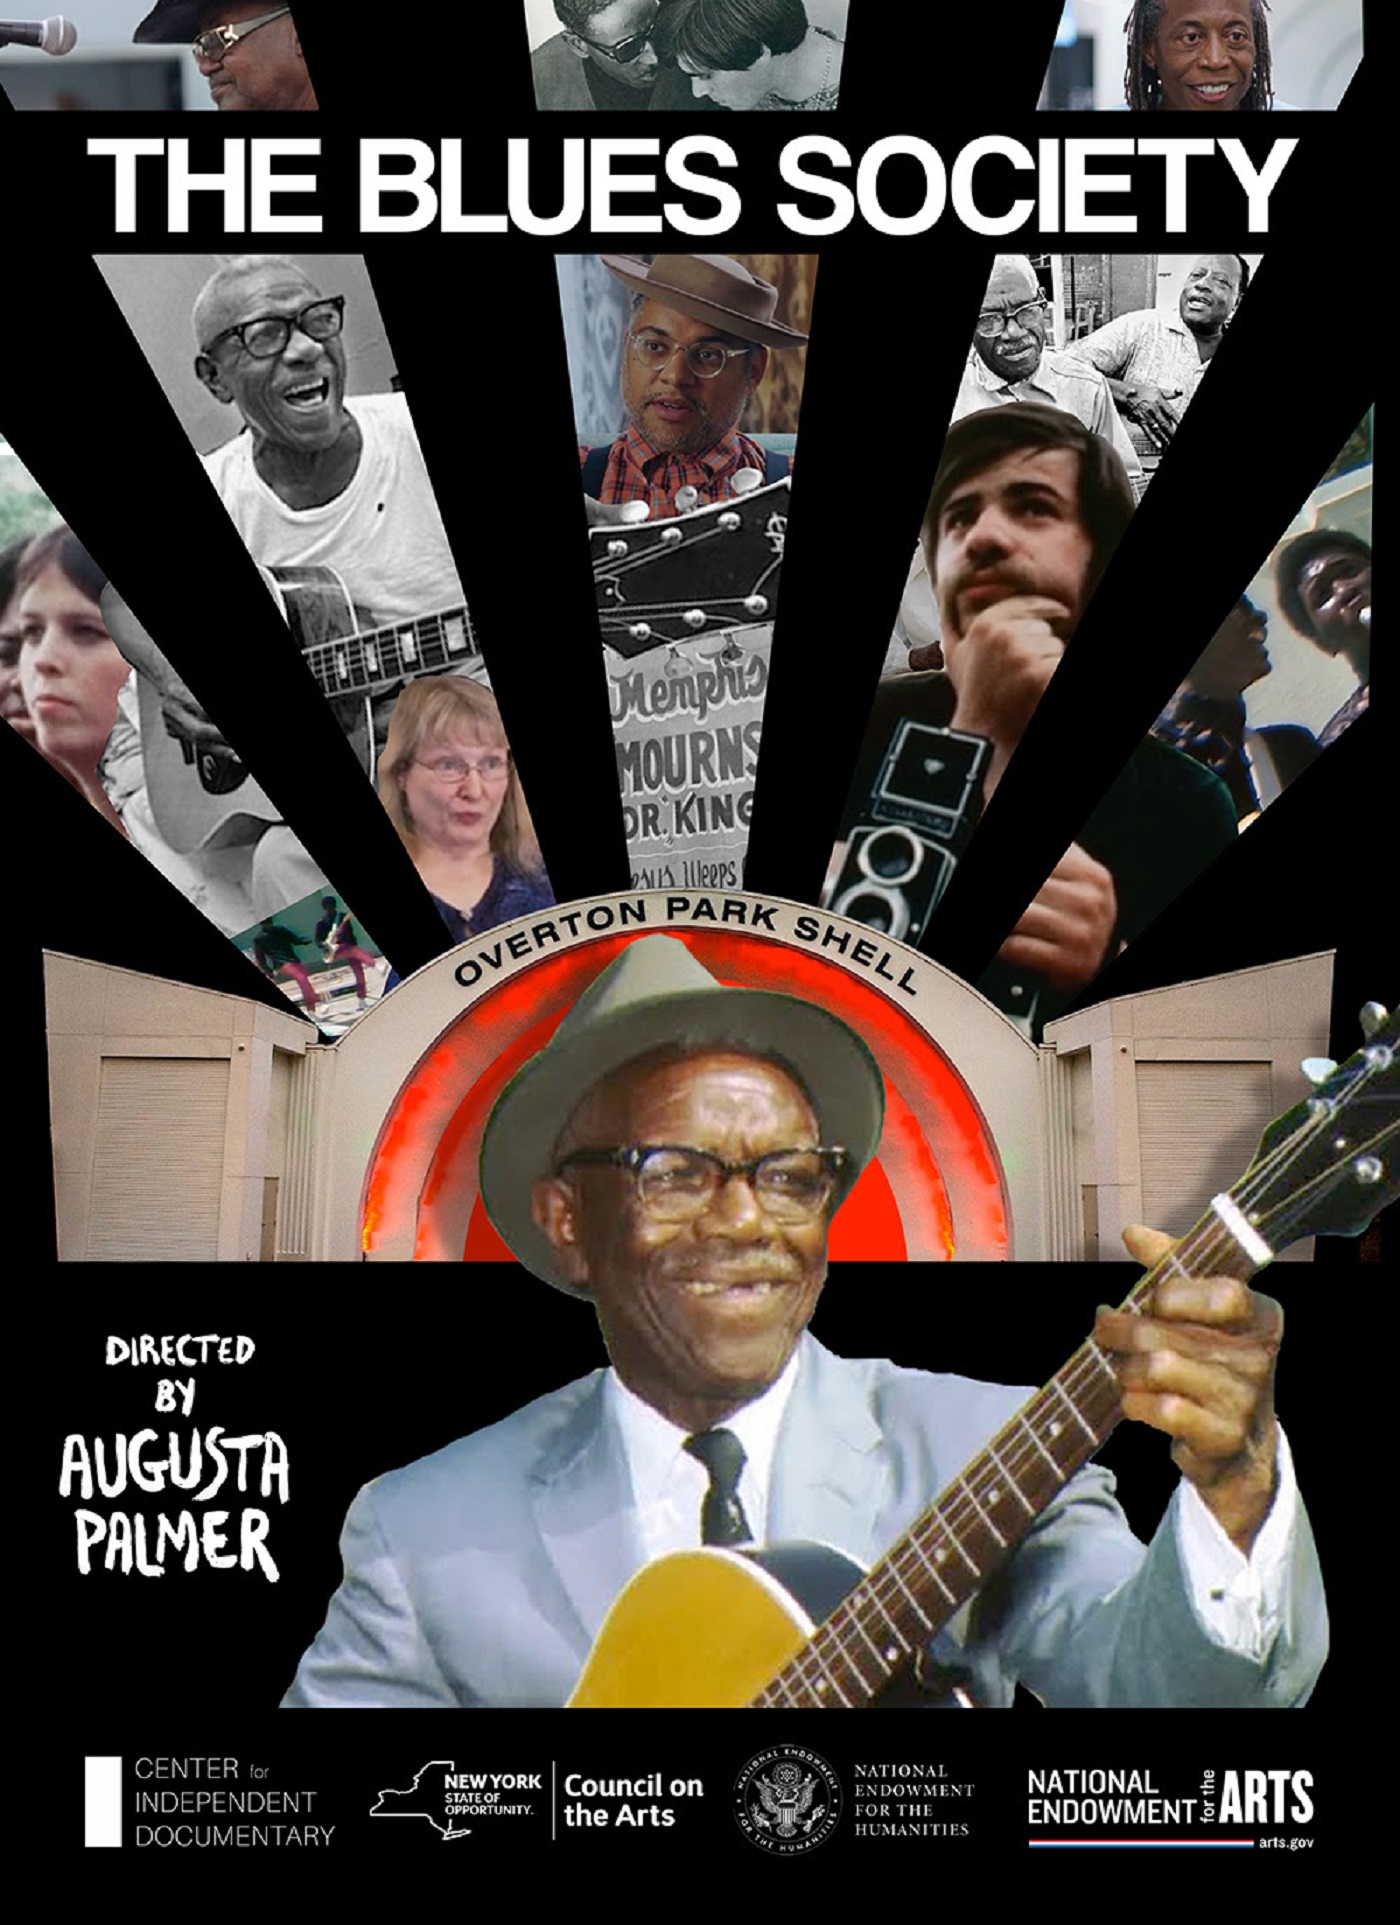 THE BLUES SOCIETY FEATURE DOCUMENTARY BY DR. AUGUSTA PALMER RELEASES TO STREAMING ON JULY 9